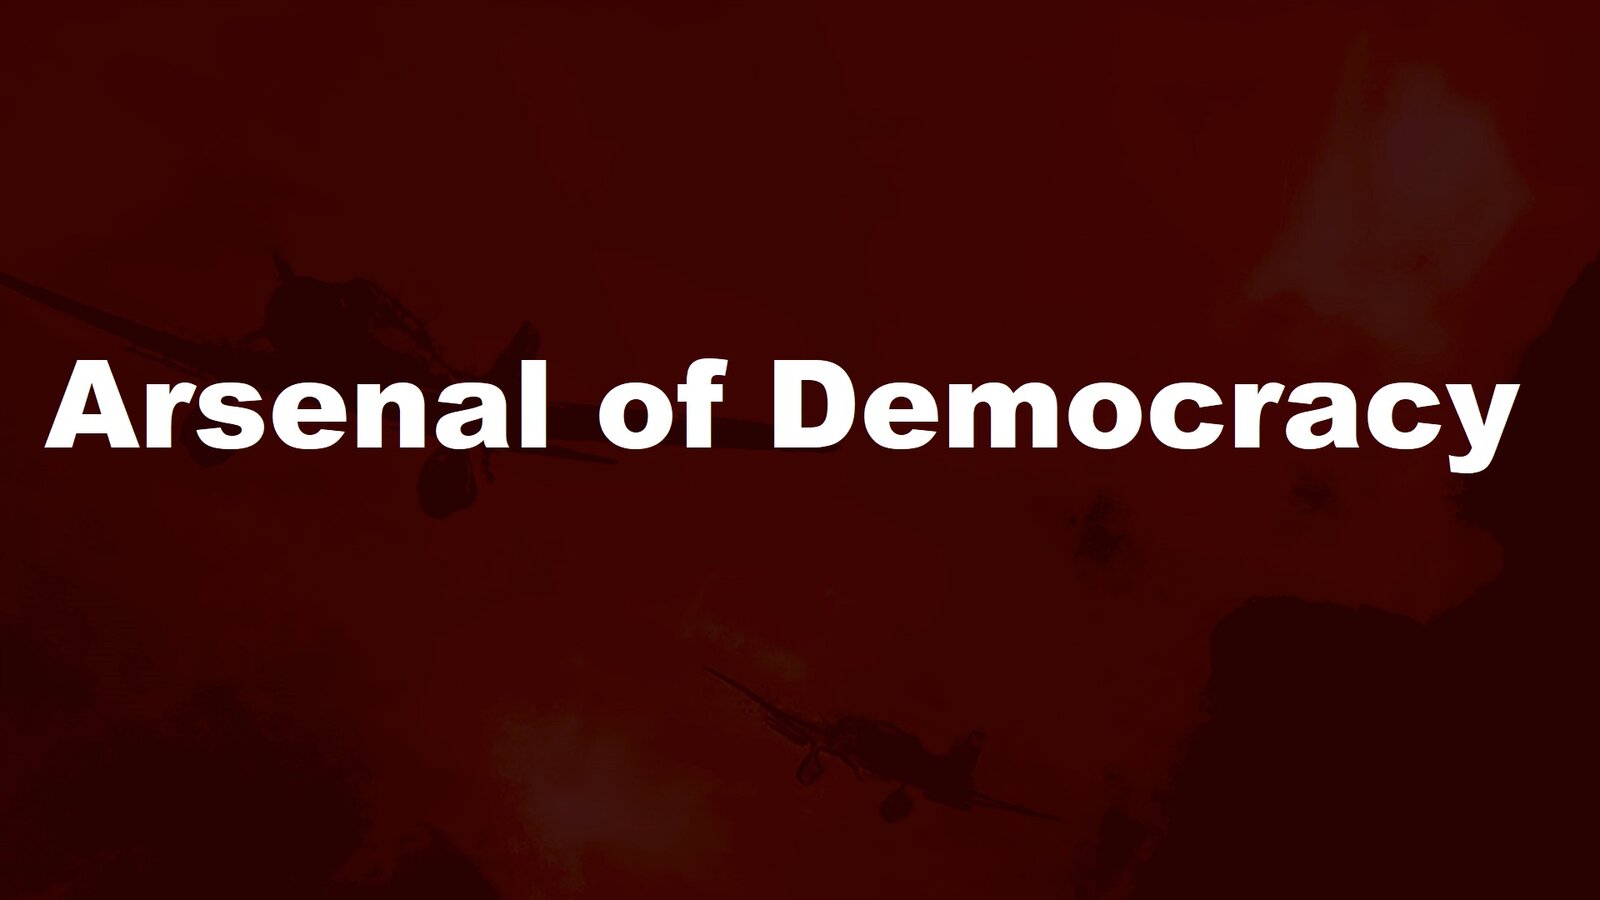 Arsenal of Democracy: A Hearts of Iron Game